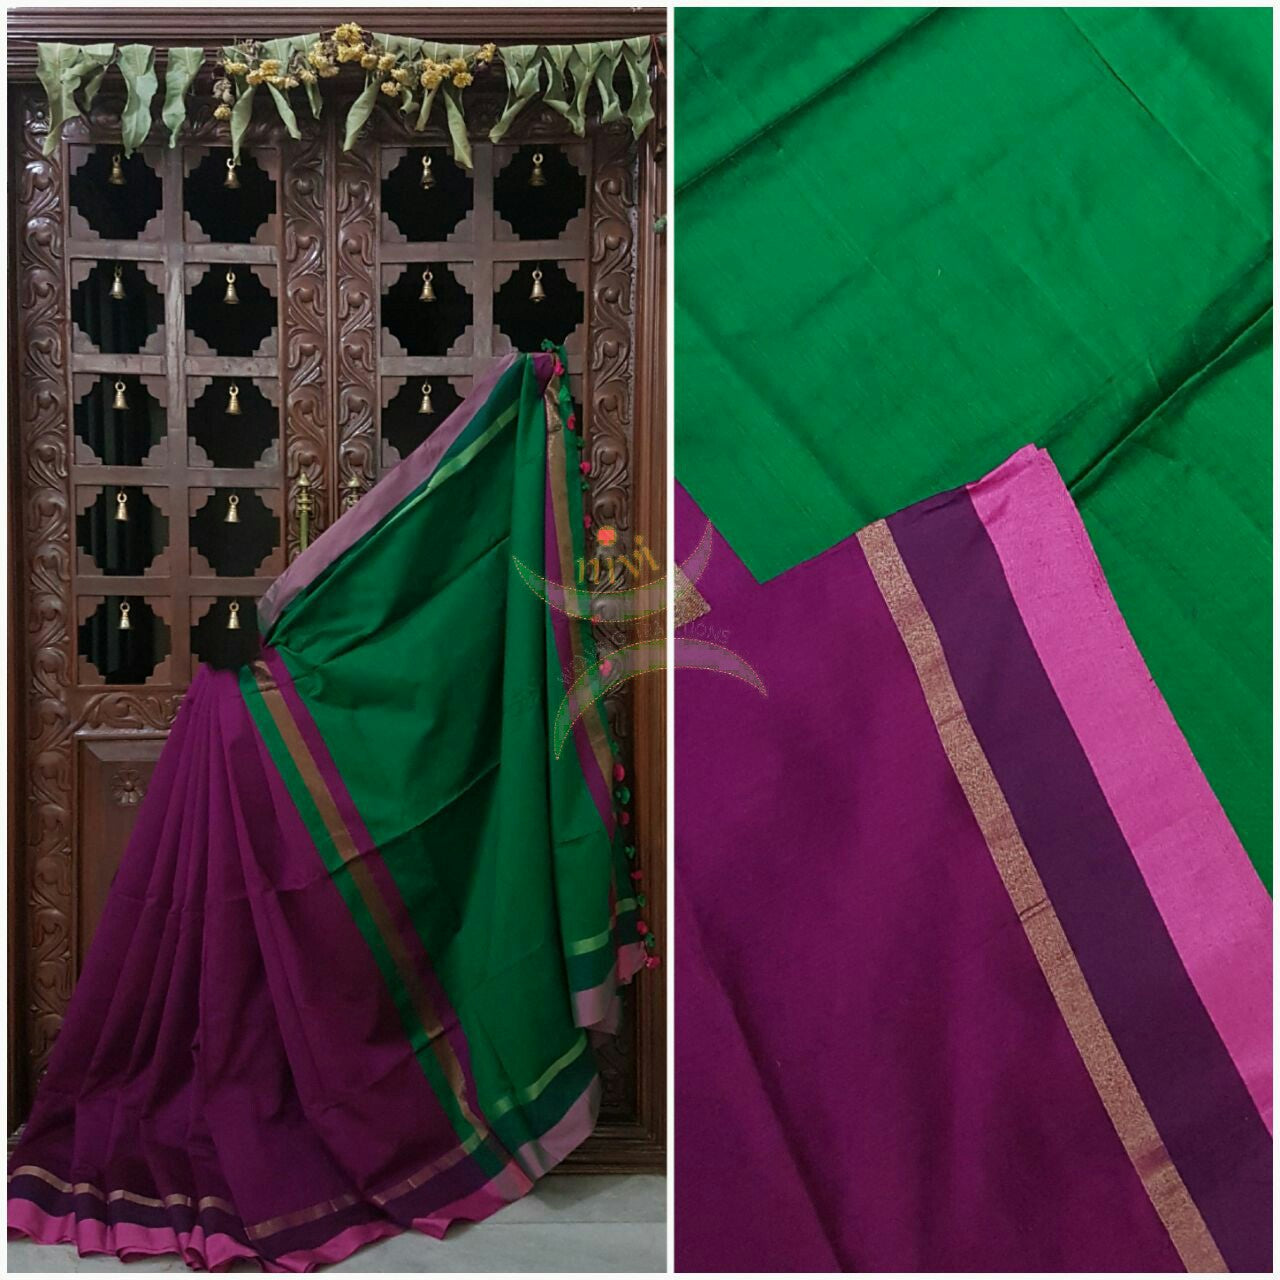 Purple Handloom merserised soft cotton saree with contrast pink border. saree comes with green pallu and green blouse.